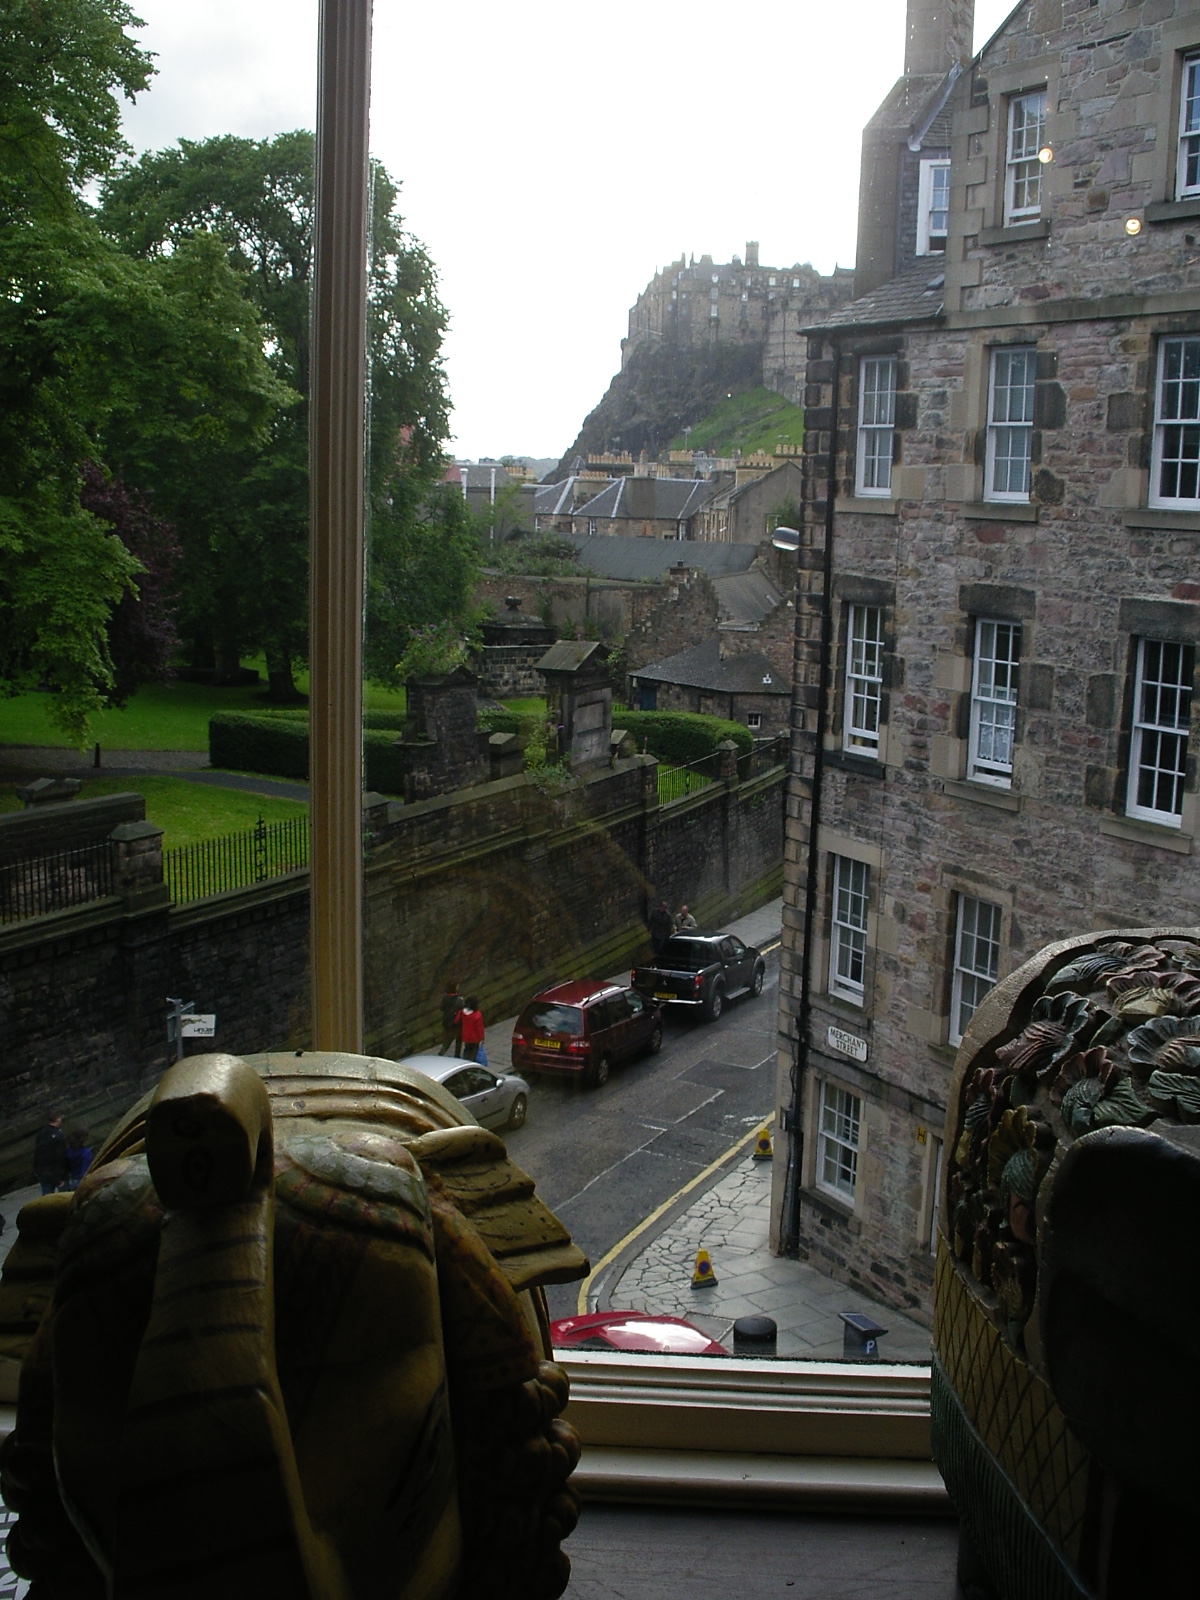 View from <the elephant house>, the birthplace of Harry Potter